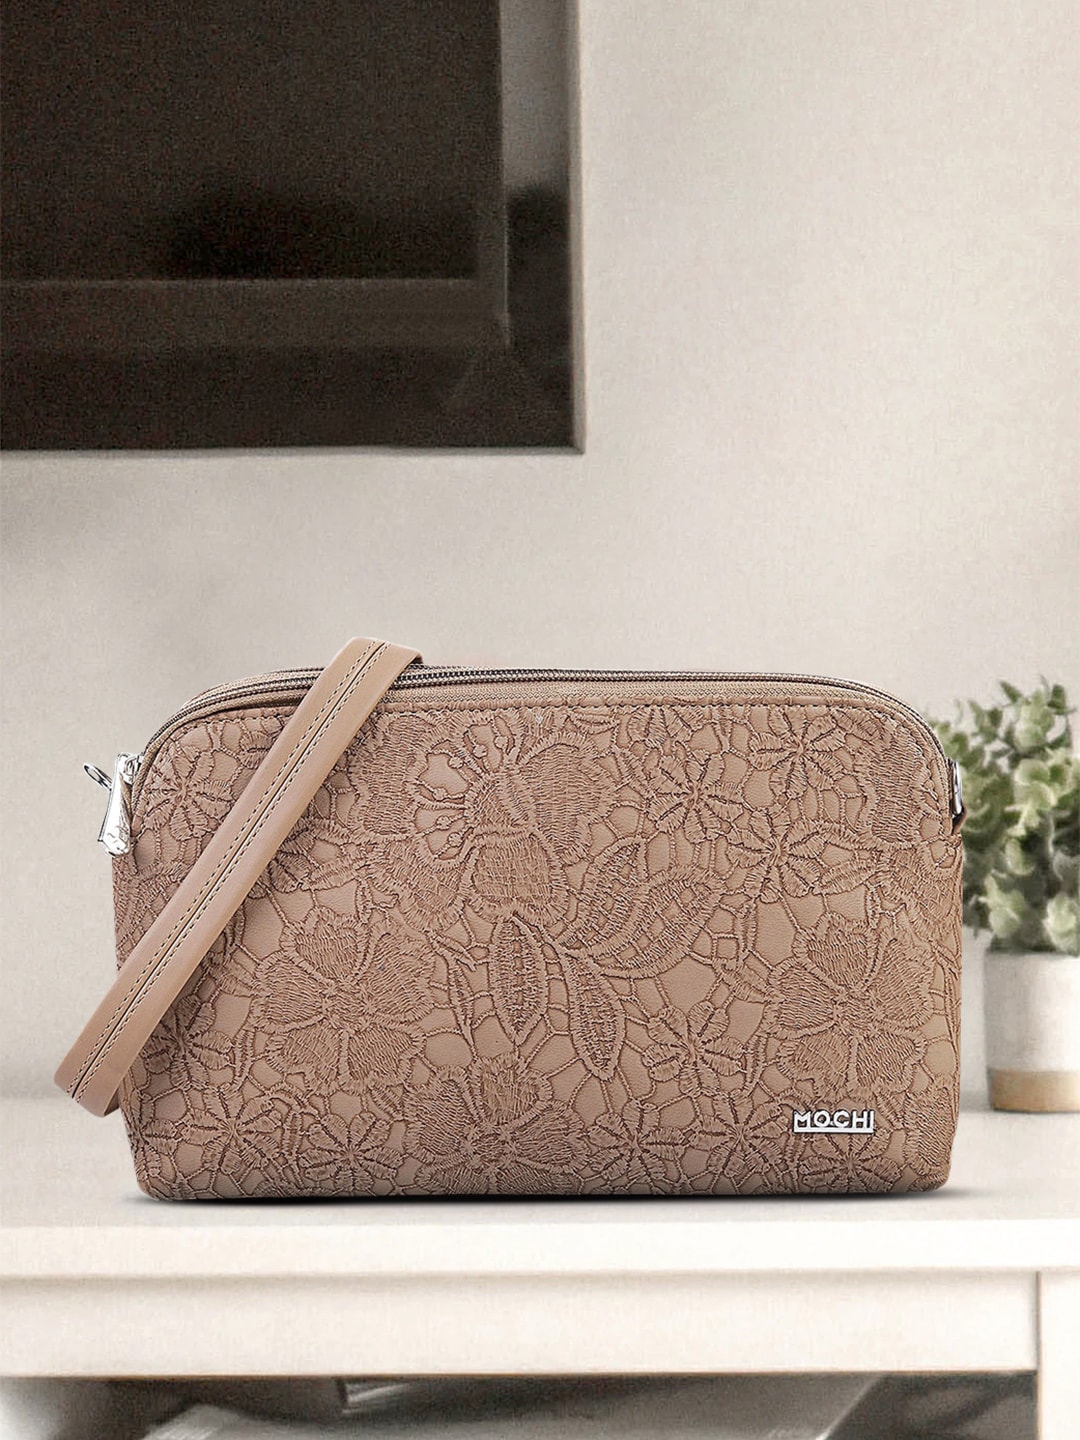 Mochi Brown Textured Sling Bag Price in India